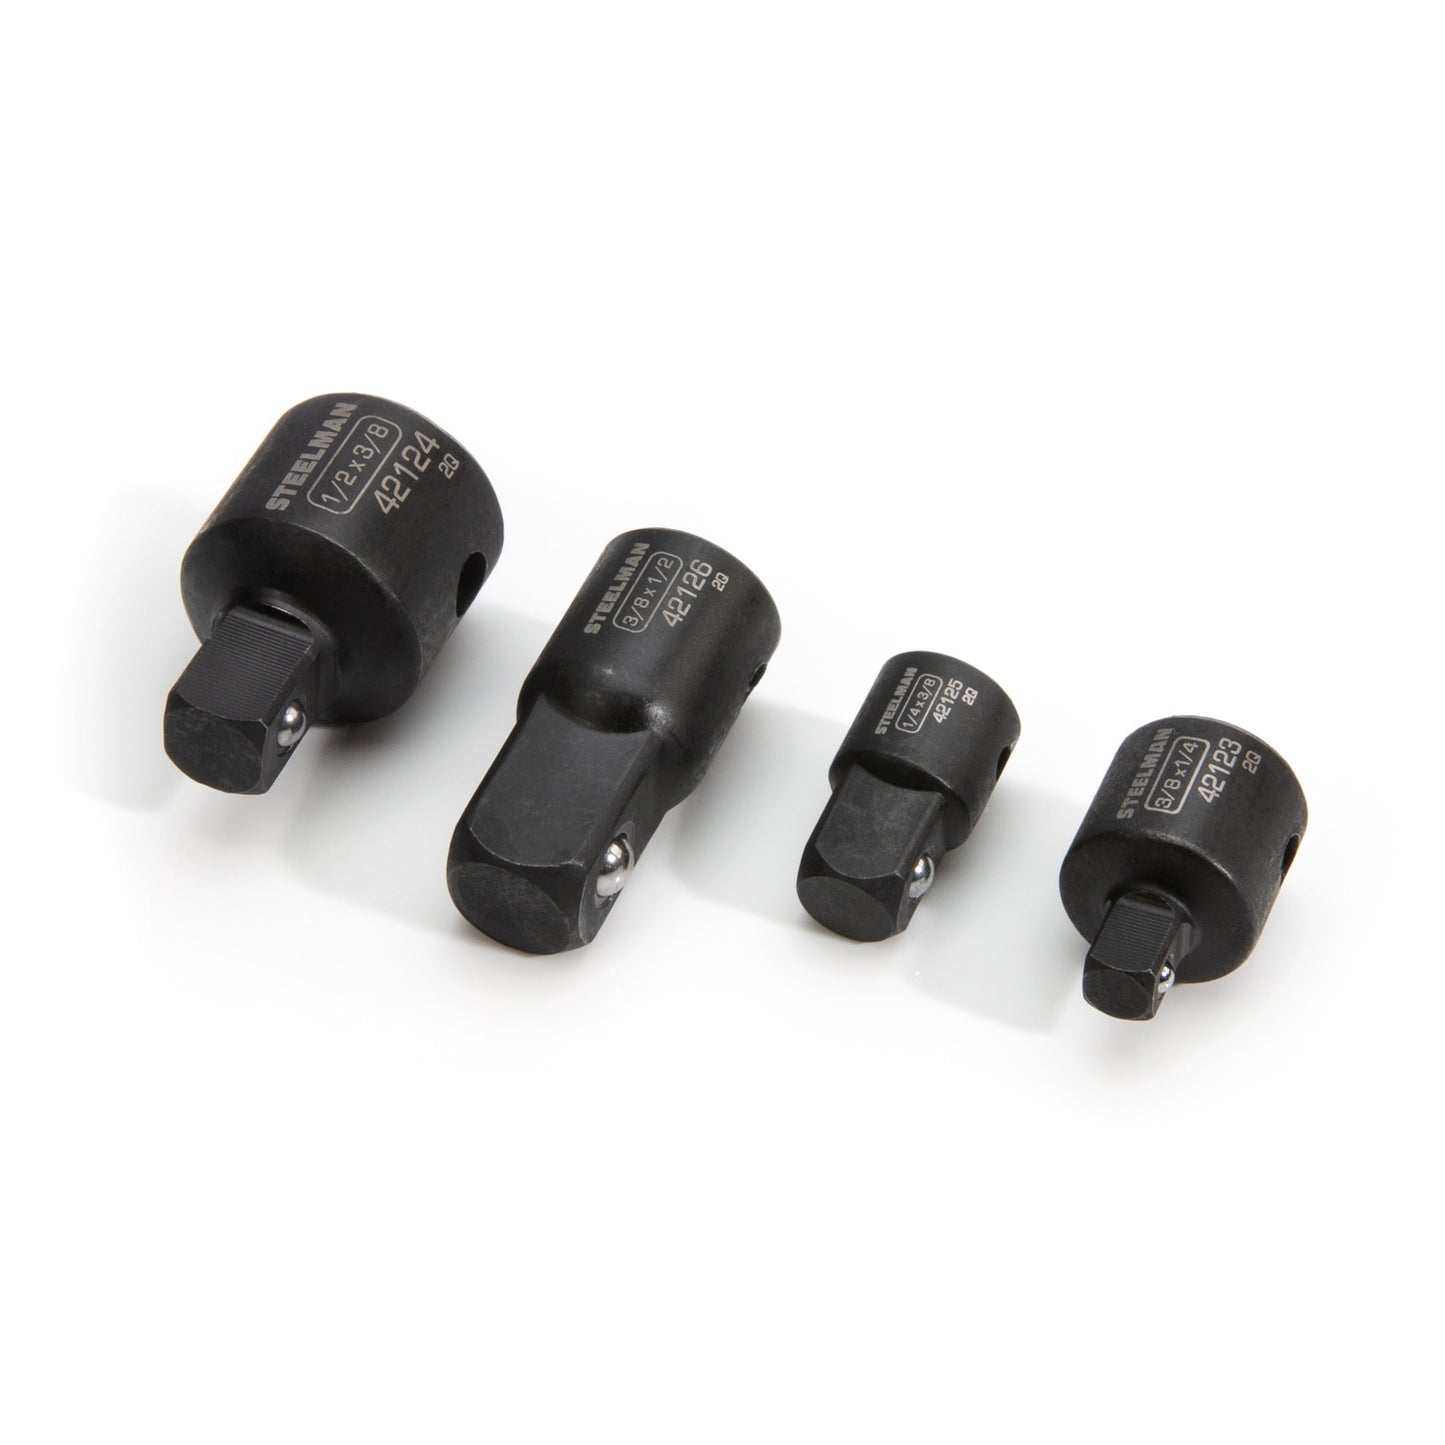 4-Piece Impact Adapter and Reducer Set, 1/4-Inch, 3/8-Inch, and 1/2-Inch Drive Sizes